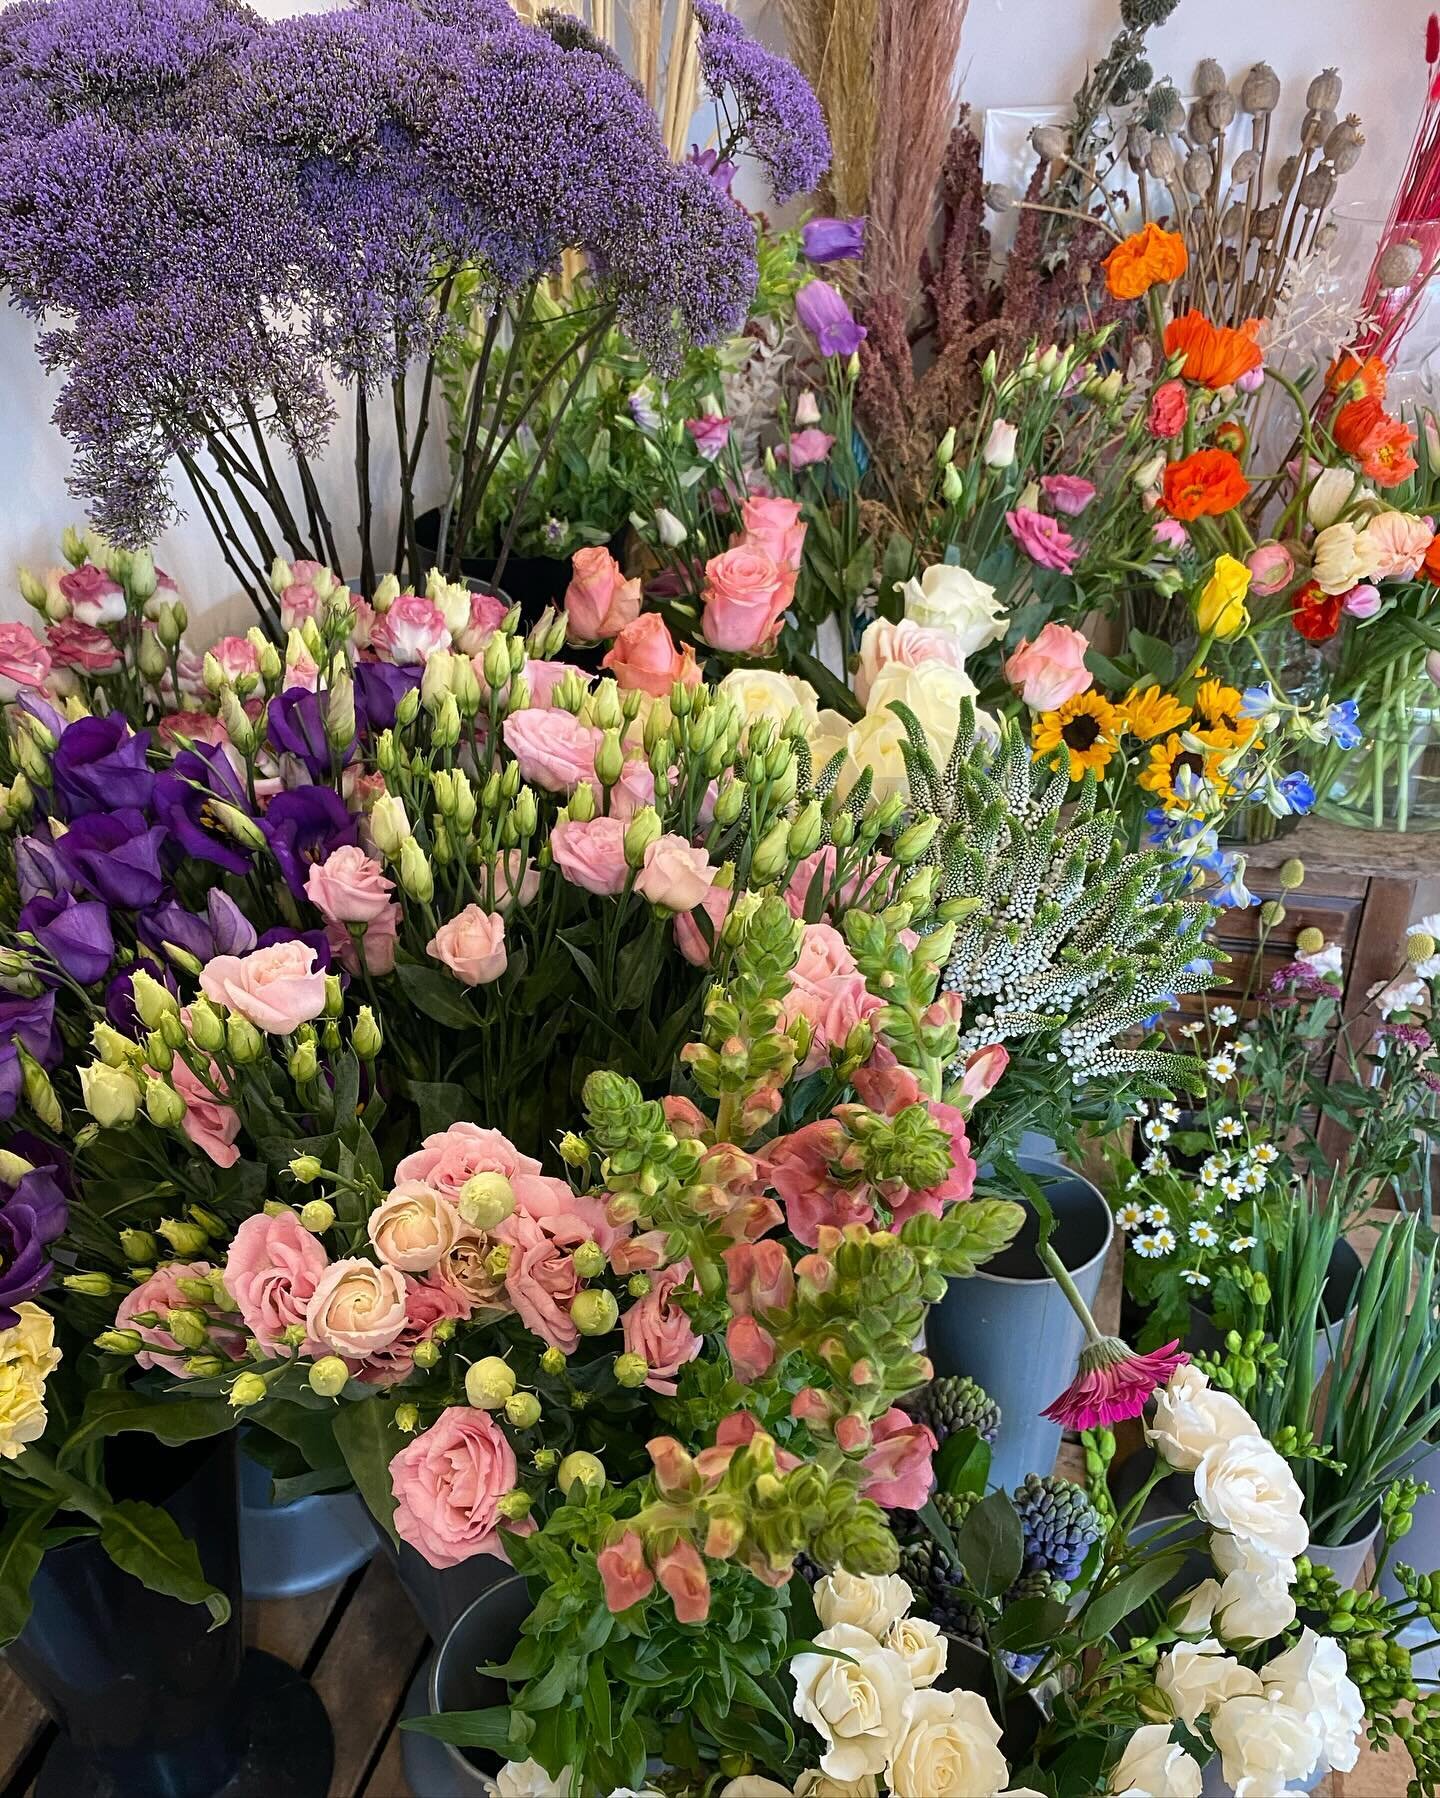 Sorry for the radio silence! We have been busy bees make all your orders 🐝 Thank you so much! We have managed to get more flowers in, if you&rsquo;d like a bouquet just let us know 💐 01432 271138. We are open till 5 today and Sunday 9-12! 🌸